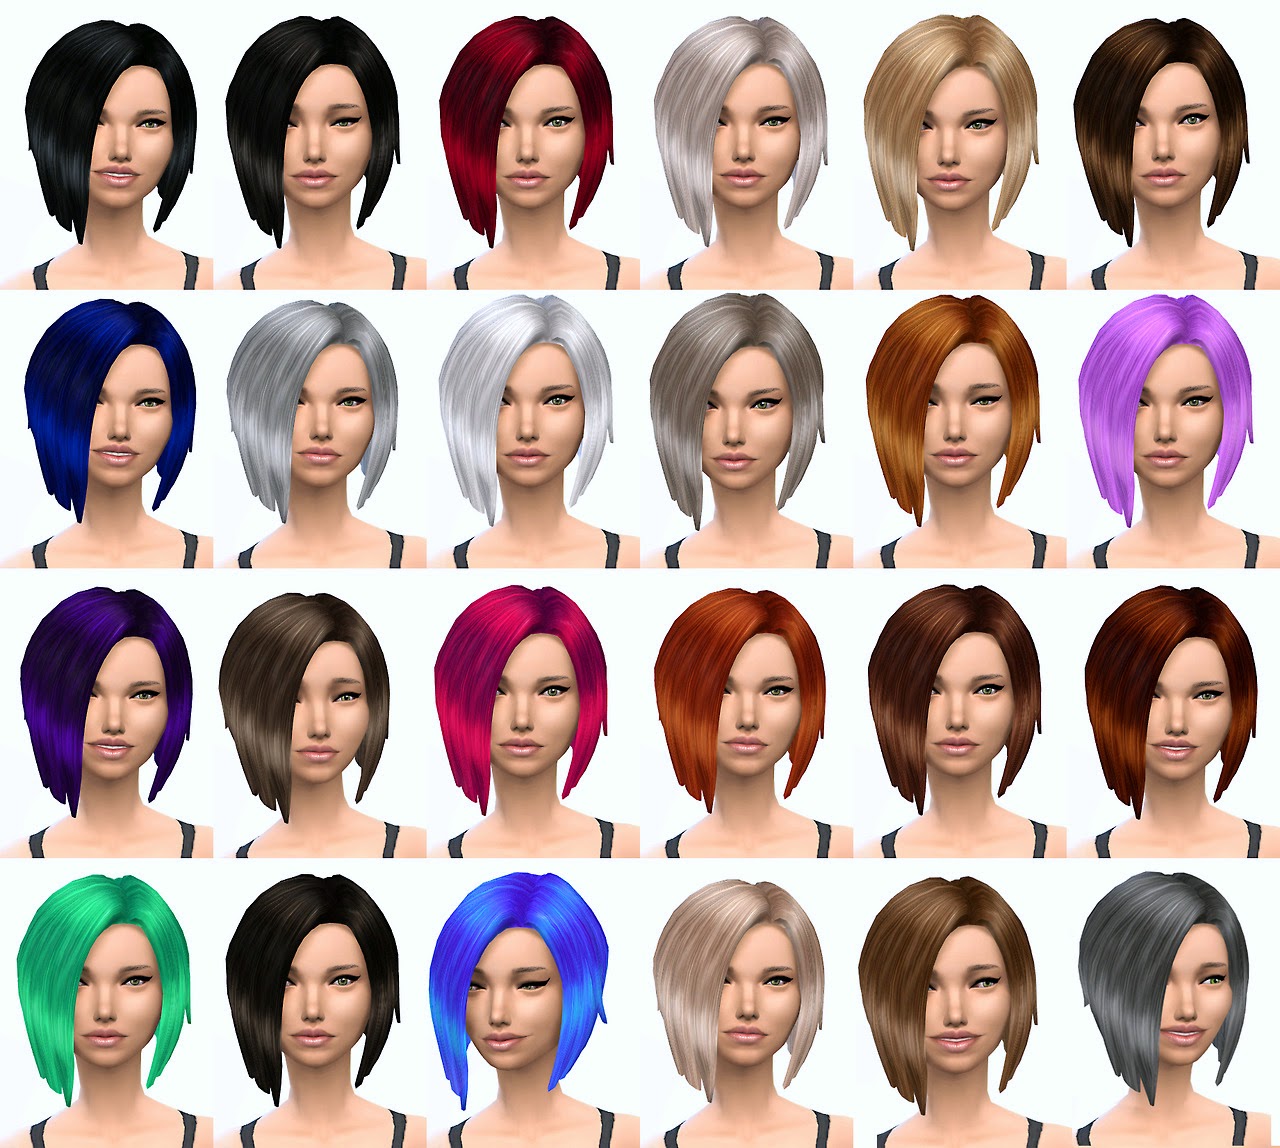 sims 4 more hair colors mod